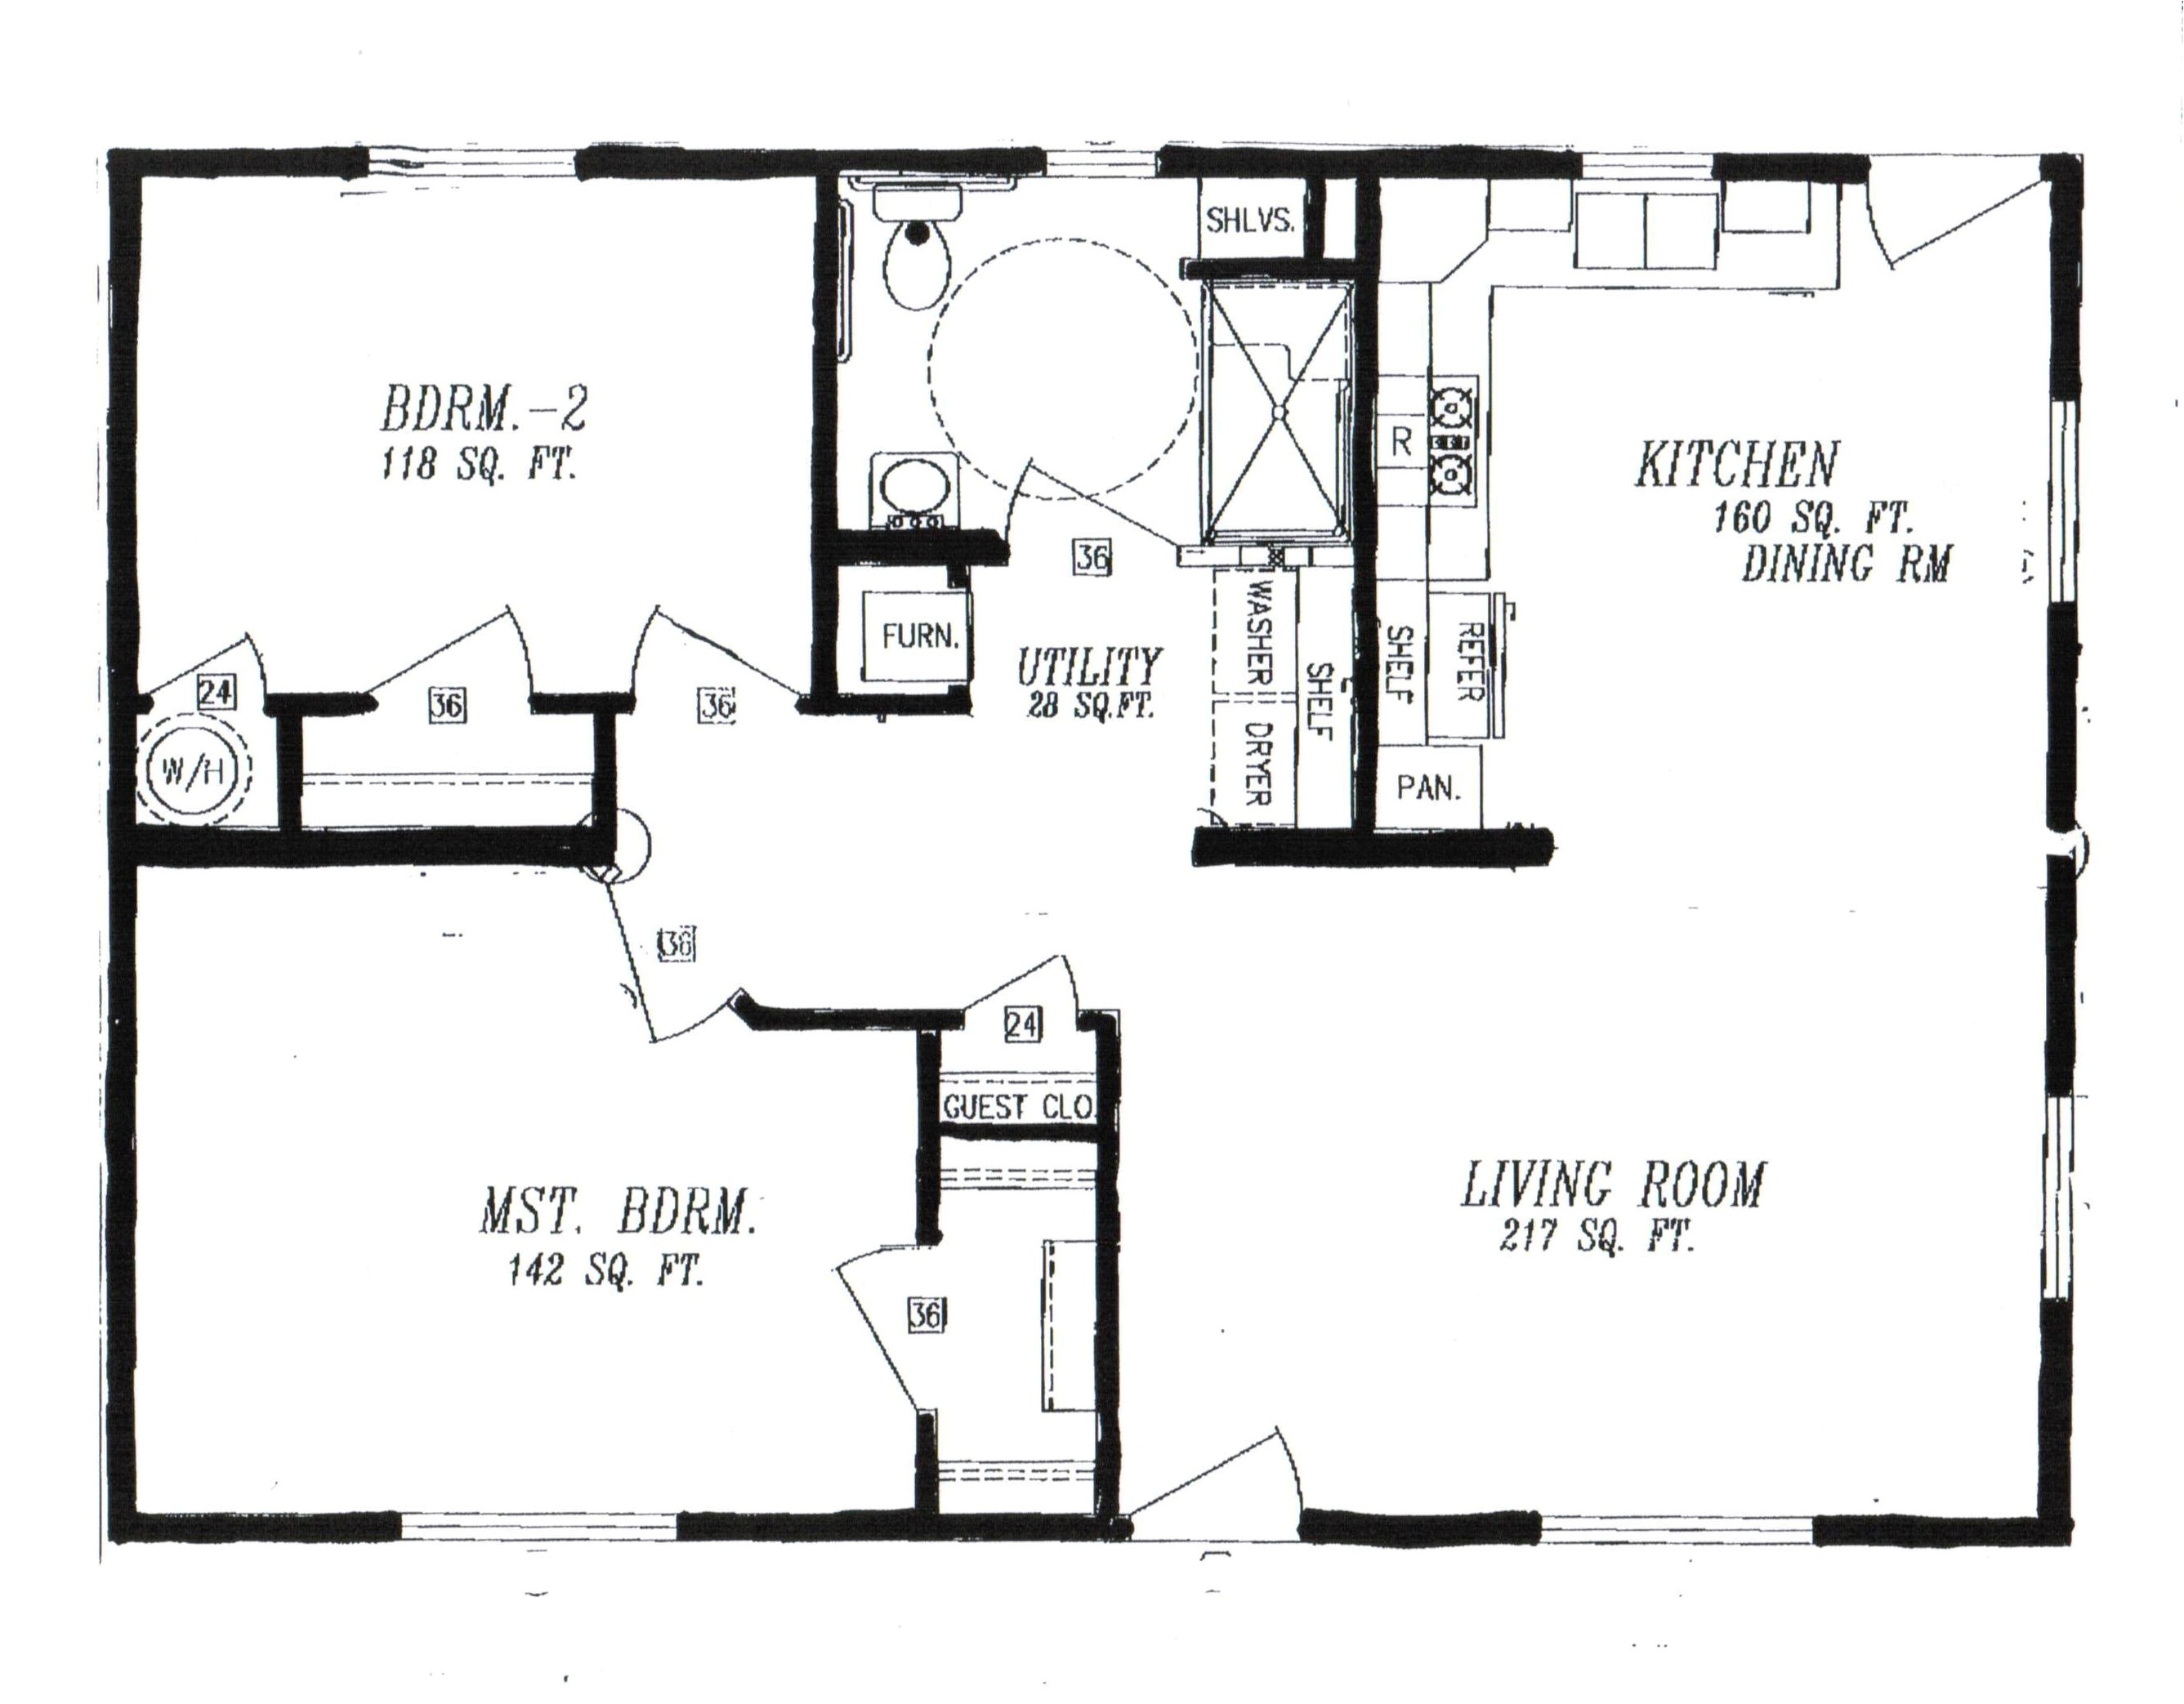 Ada Home Floor Plans Columbia Manufactured Homes